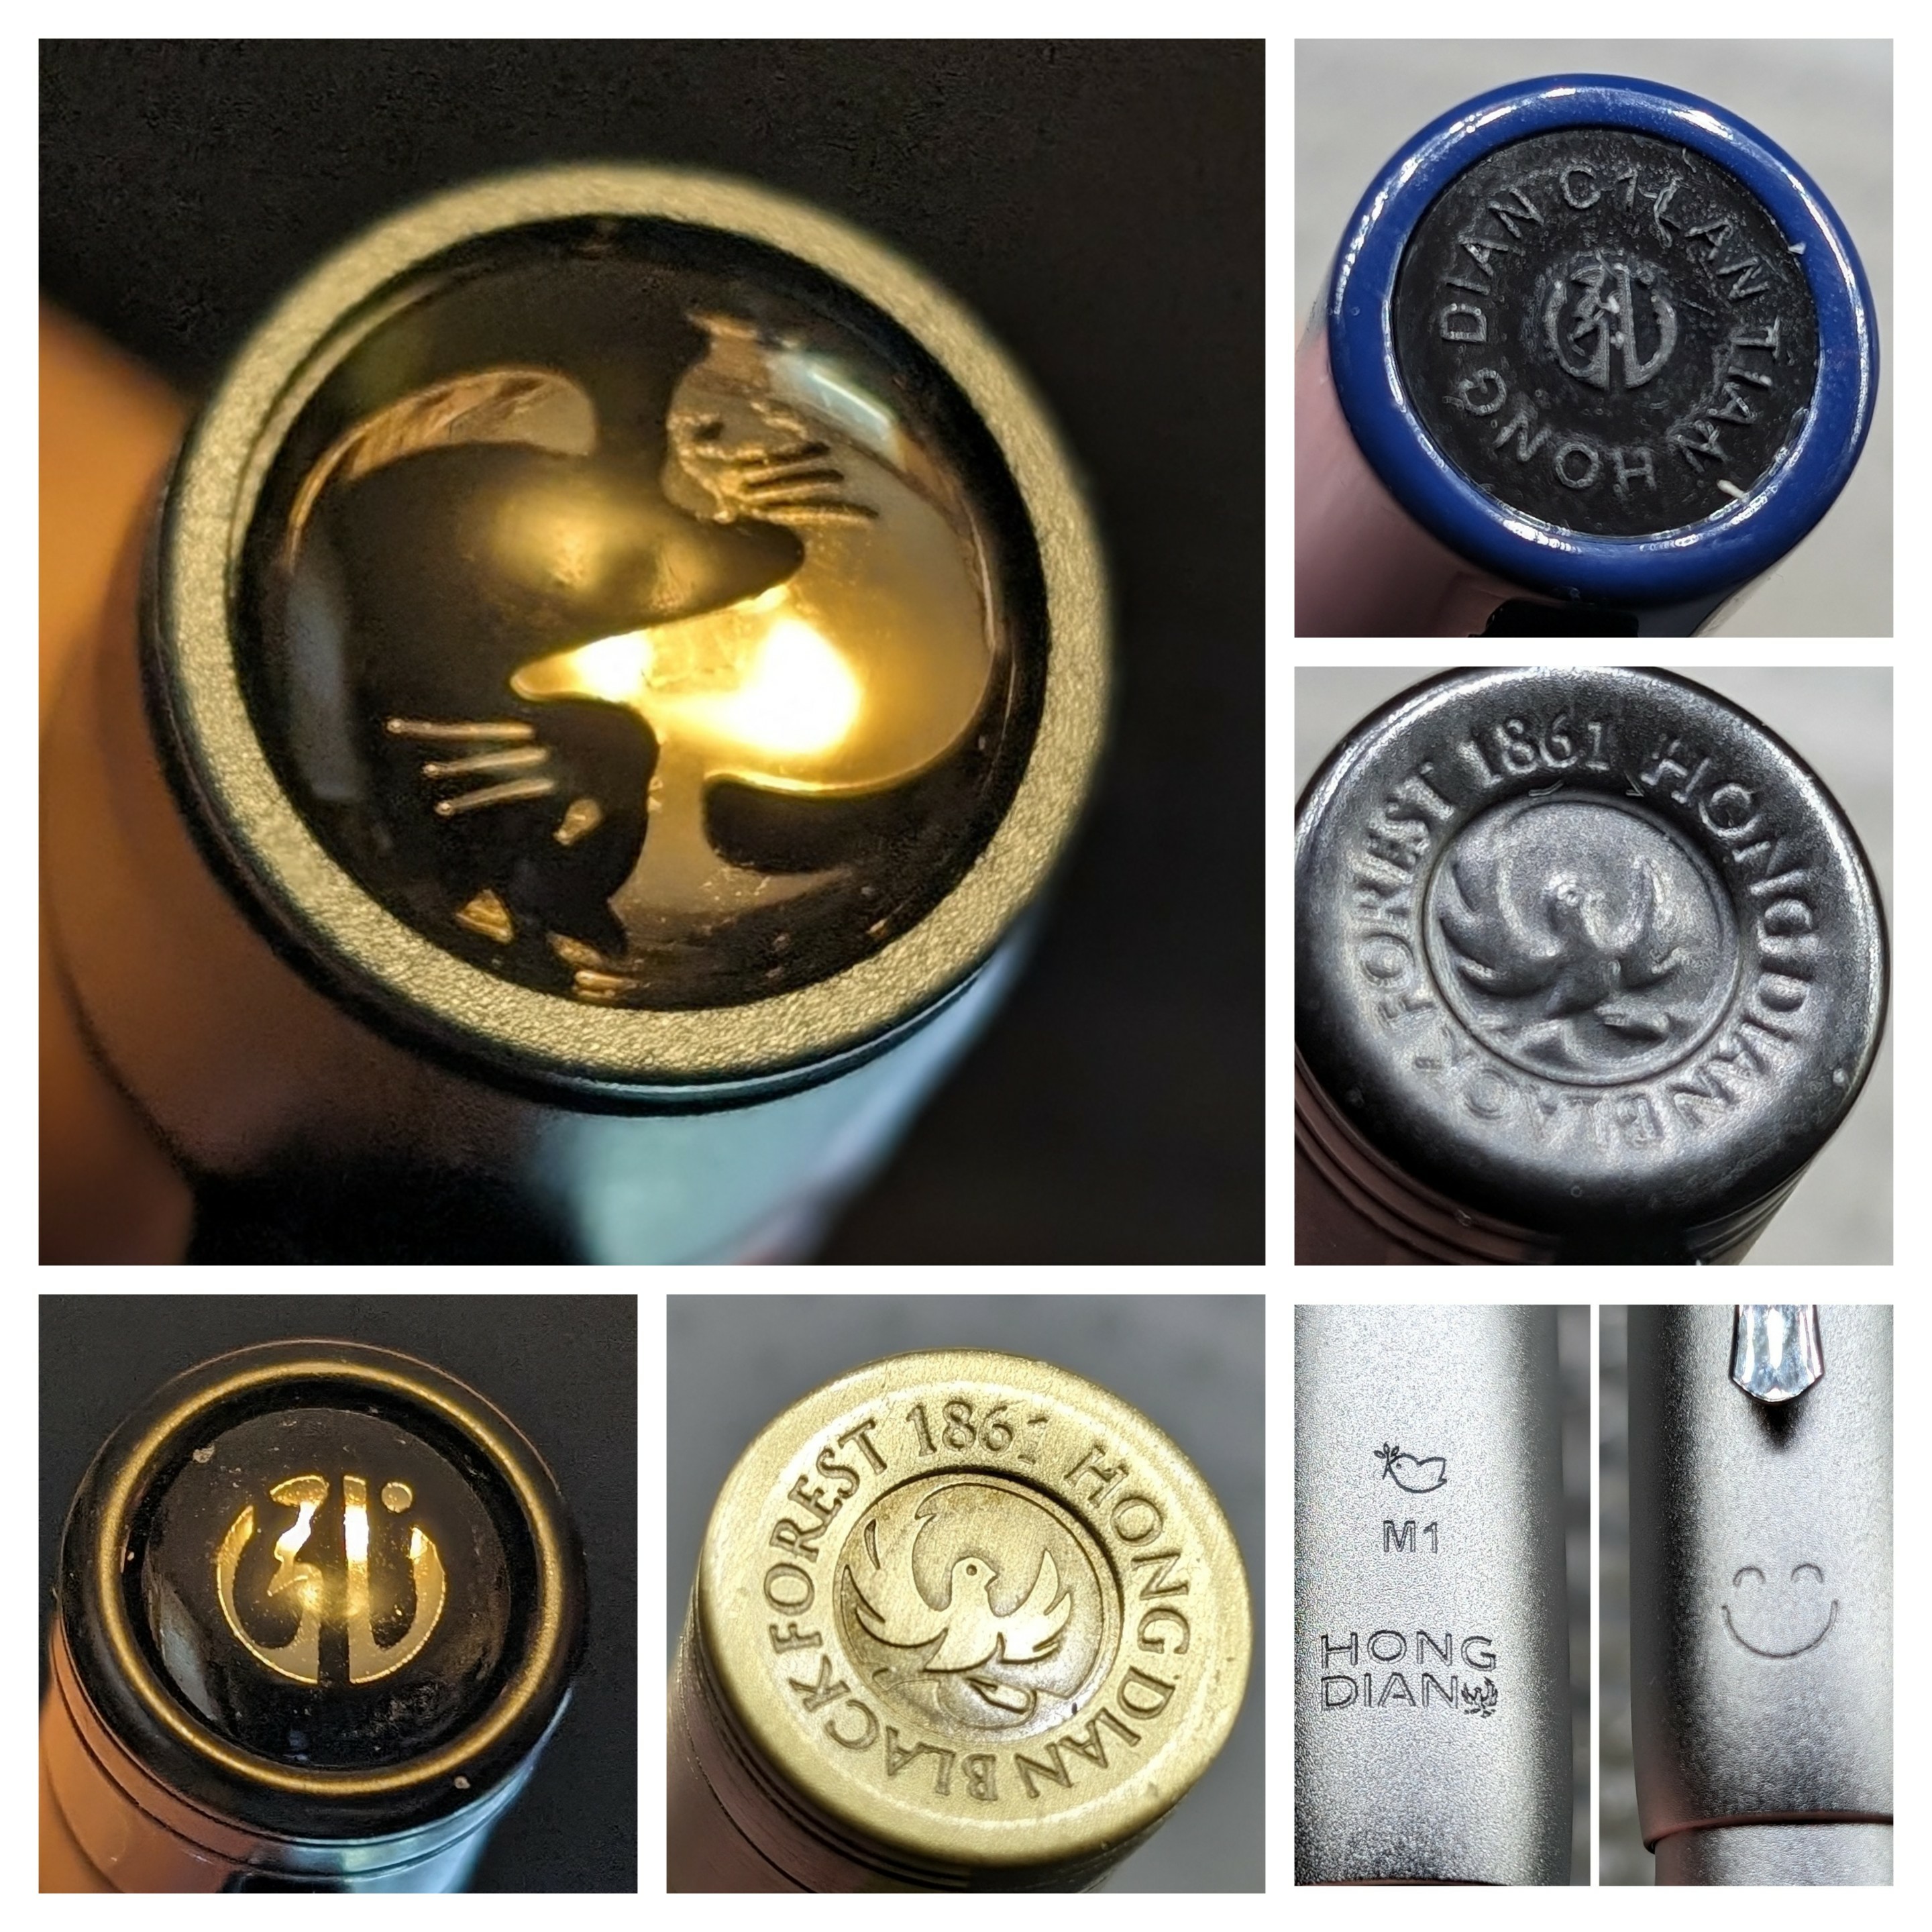 Collage with one large photo in upper left and five other smaller photos to its right and below.

All photos are of the end ("final") of a pen except the lower right which is split between two views of the side of a pen cap.

* Upper Left - M2 Black Forest Mini - Midnight Blue - Cat under glossy dome

* Upper Right - C1 - Dark Blue - Company Logo with text circling it "Hong Dian C1 Lantian"

* Middle Right - 1861 Black Forest Pro - Carbon Fiber - Bird (Low detail) with text circling it "Hong Dian Black Forest 1861"

* Lower Right - M1 - Silver - Split between views of the pen cap: Small Bird with a branch in its mouth above text saying "M1 Hong Dian" followed by another small bird / Smile under the clip

* Bottom Middle - 1861 Black Forest Pro - Raw Brass - Bird (High detail) with text circling it "Hong Dian Black Forest 1861"

* Bottom Left - Black Forest - Matte Black - Company Logo under glossy dome

The company logo also sort of has a cat-like shape in the negative space of the left side.
